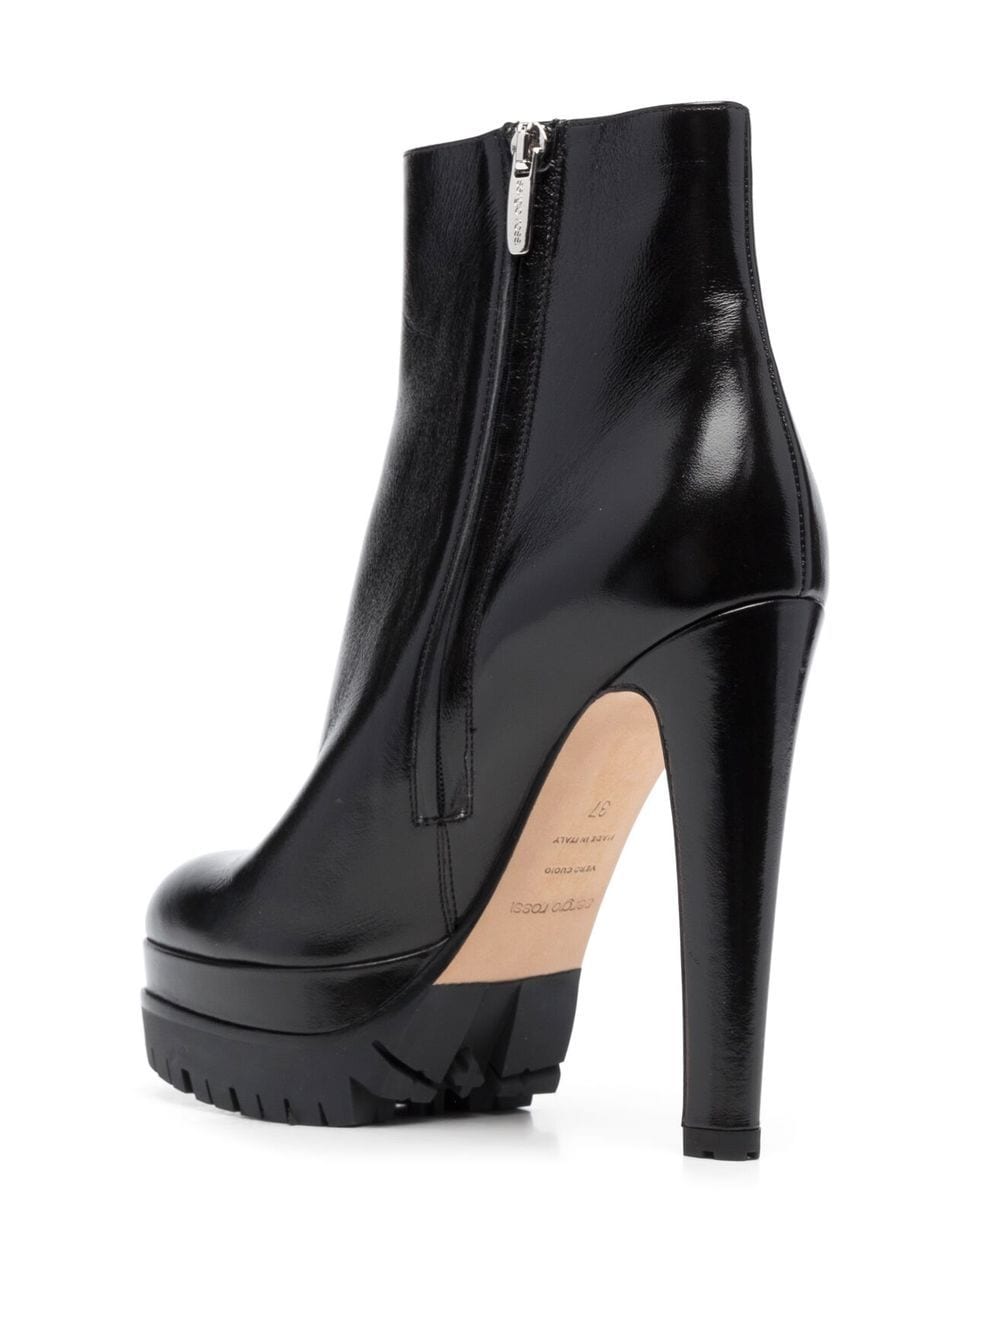 Sergio Rossi Shana ankle-length Boots - Farfetch